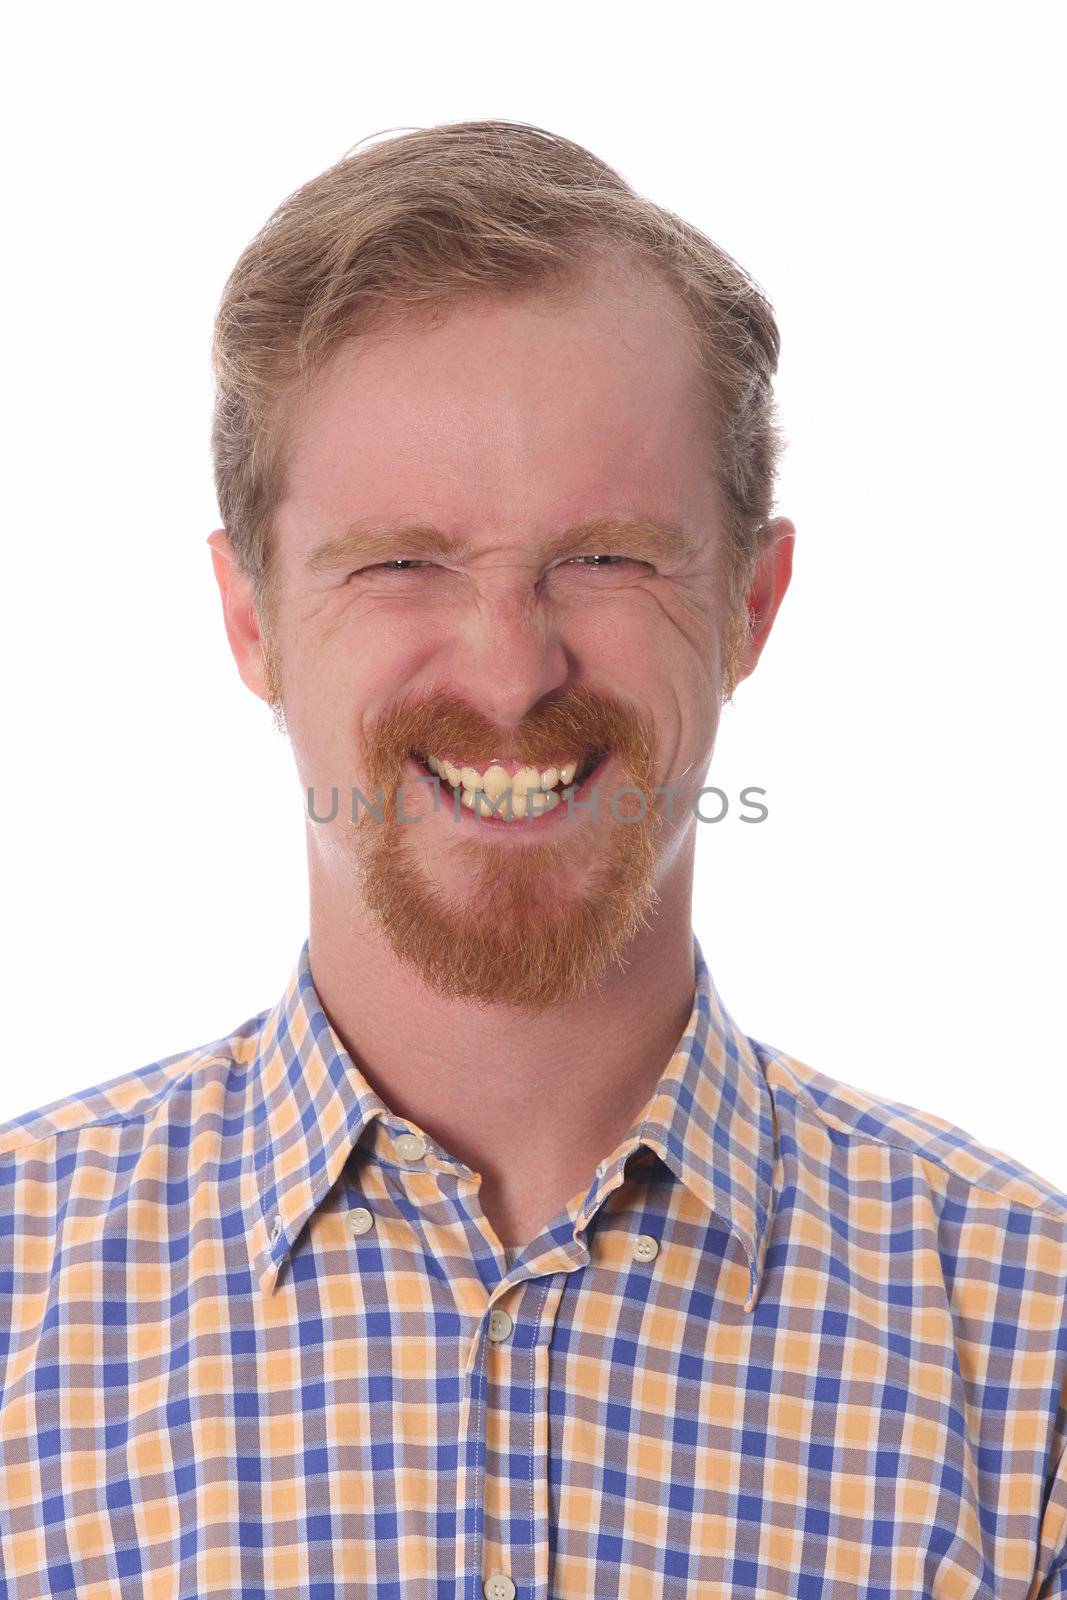 Portrait of funny man on white background